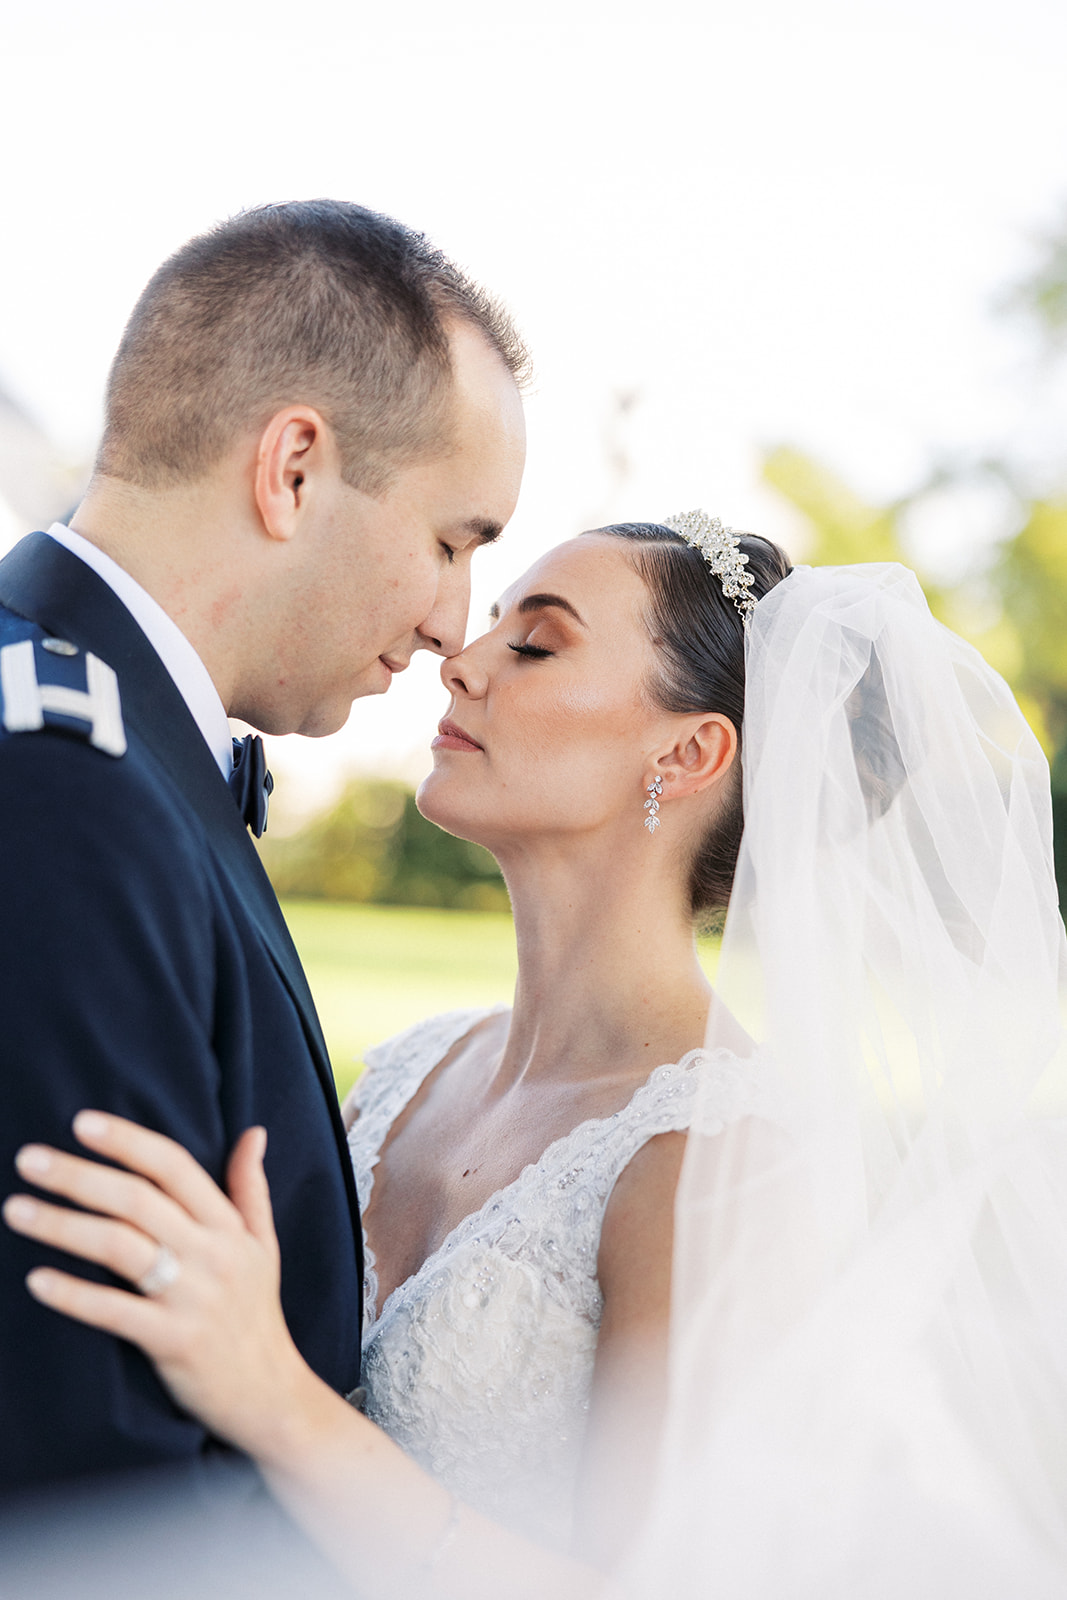 Newlyweds dance and lean in for a kiss in a white lace dress and military jacket at a The Mansion at Mountain Lakes wedding